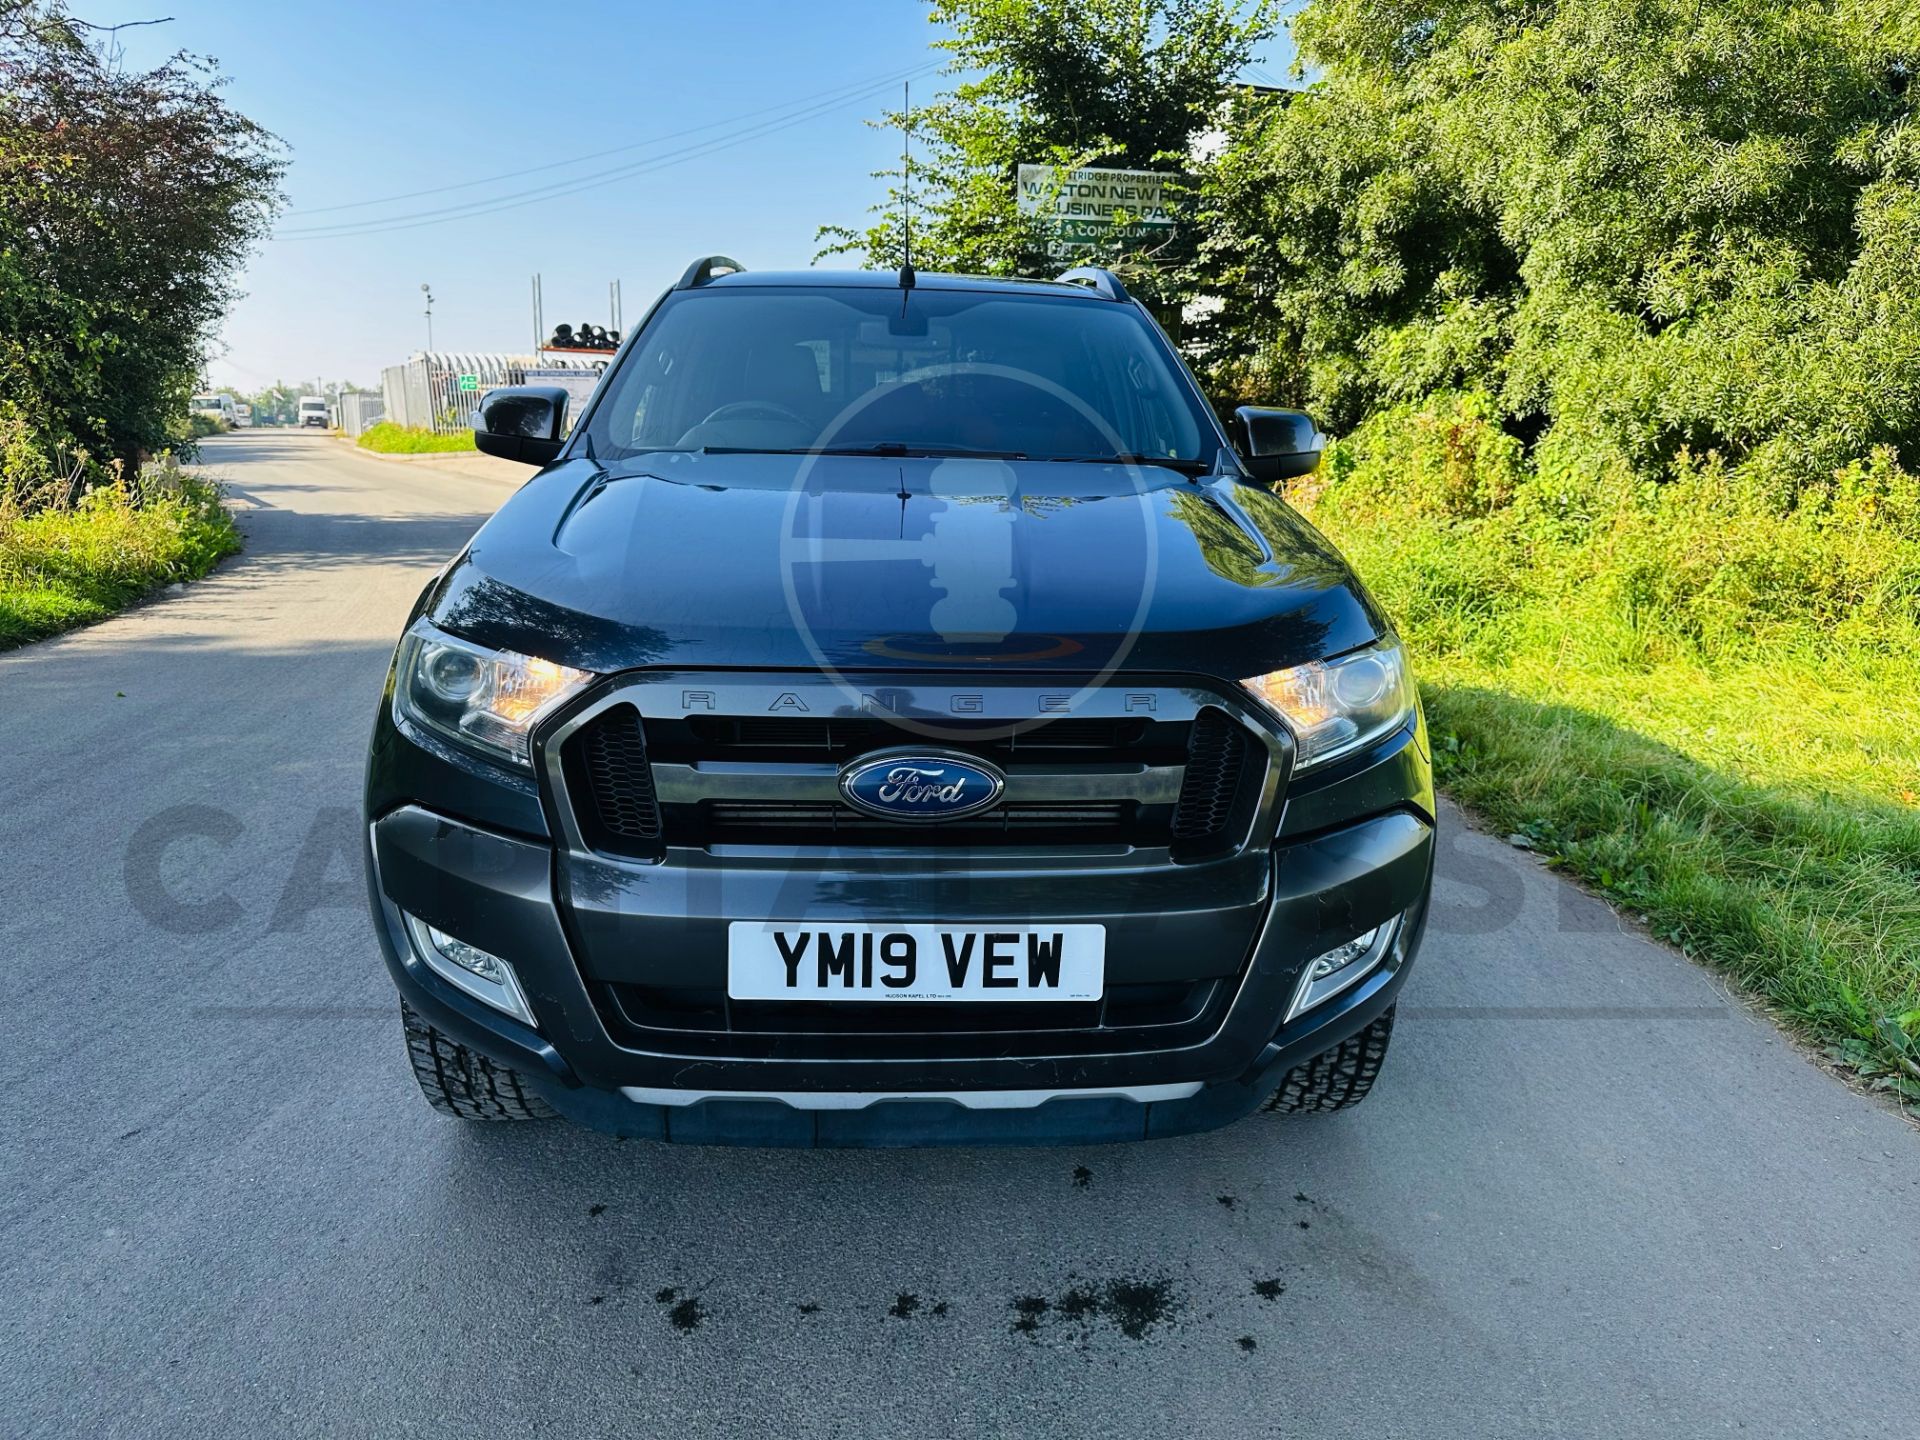 (ON SALE) FORD RANGER *WILDTRAK EDITION* DOUBLE CAB PICK-UP (2019 - EURO 6) 3.2 TDCI AUTO (1 OWNER) - Image 4 of 34